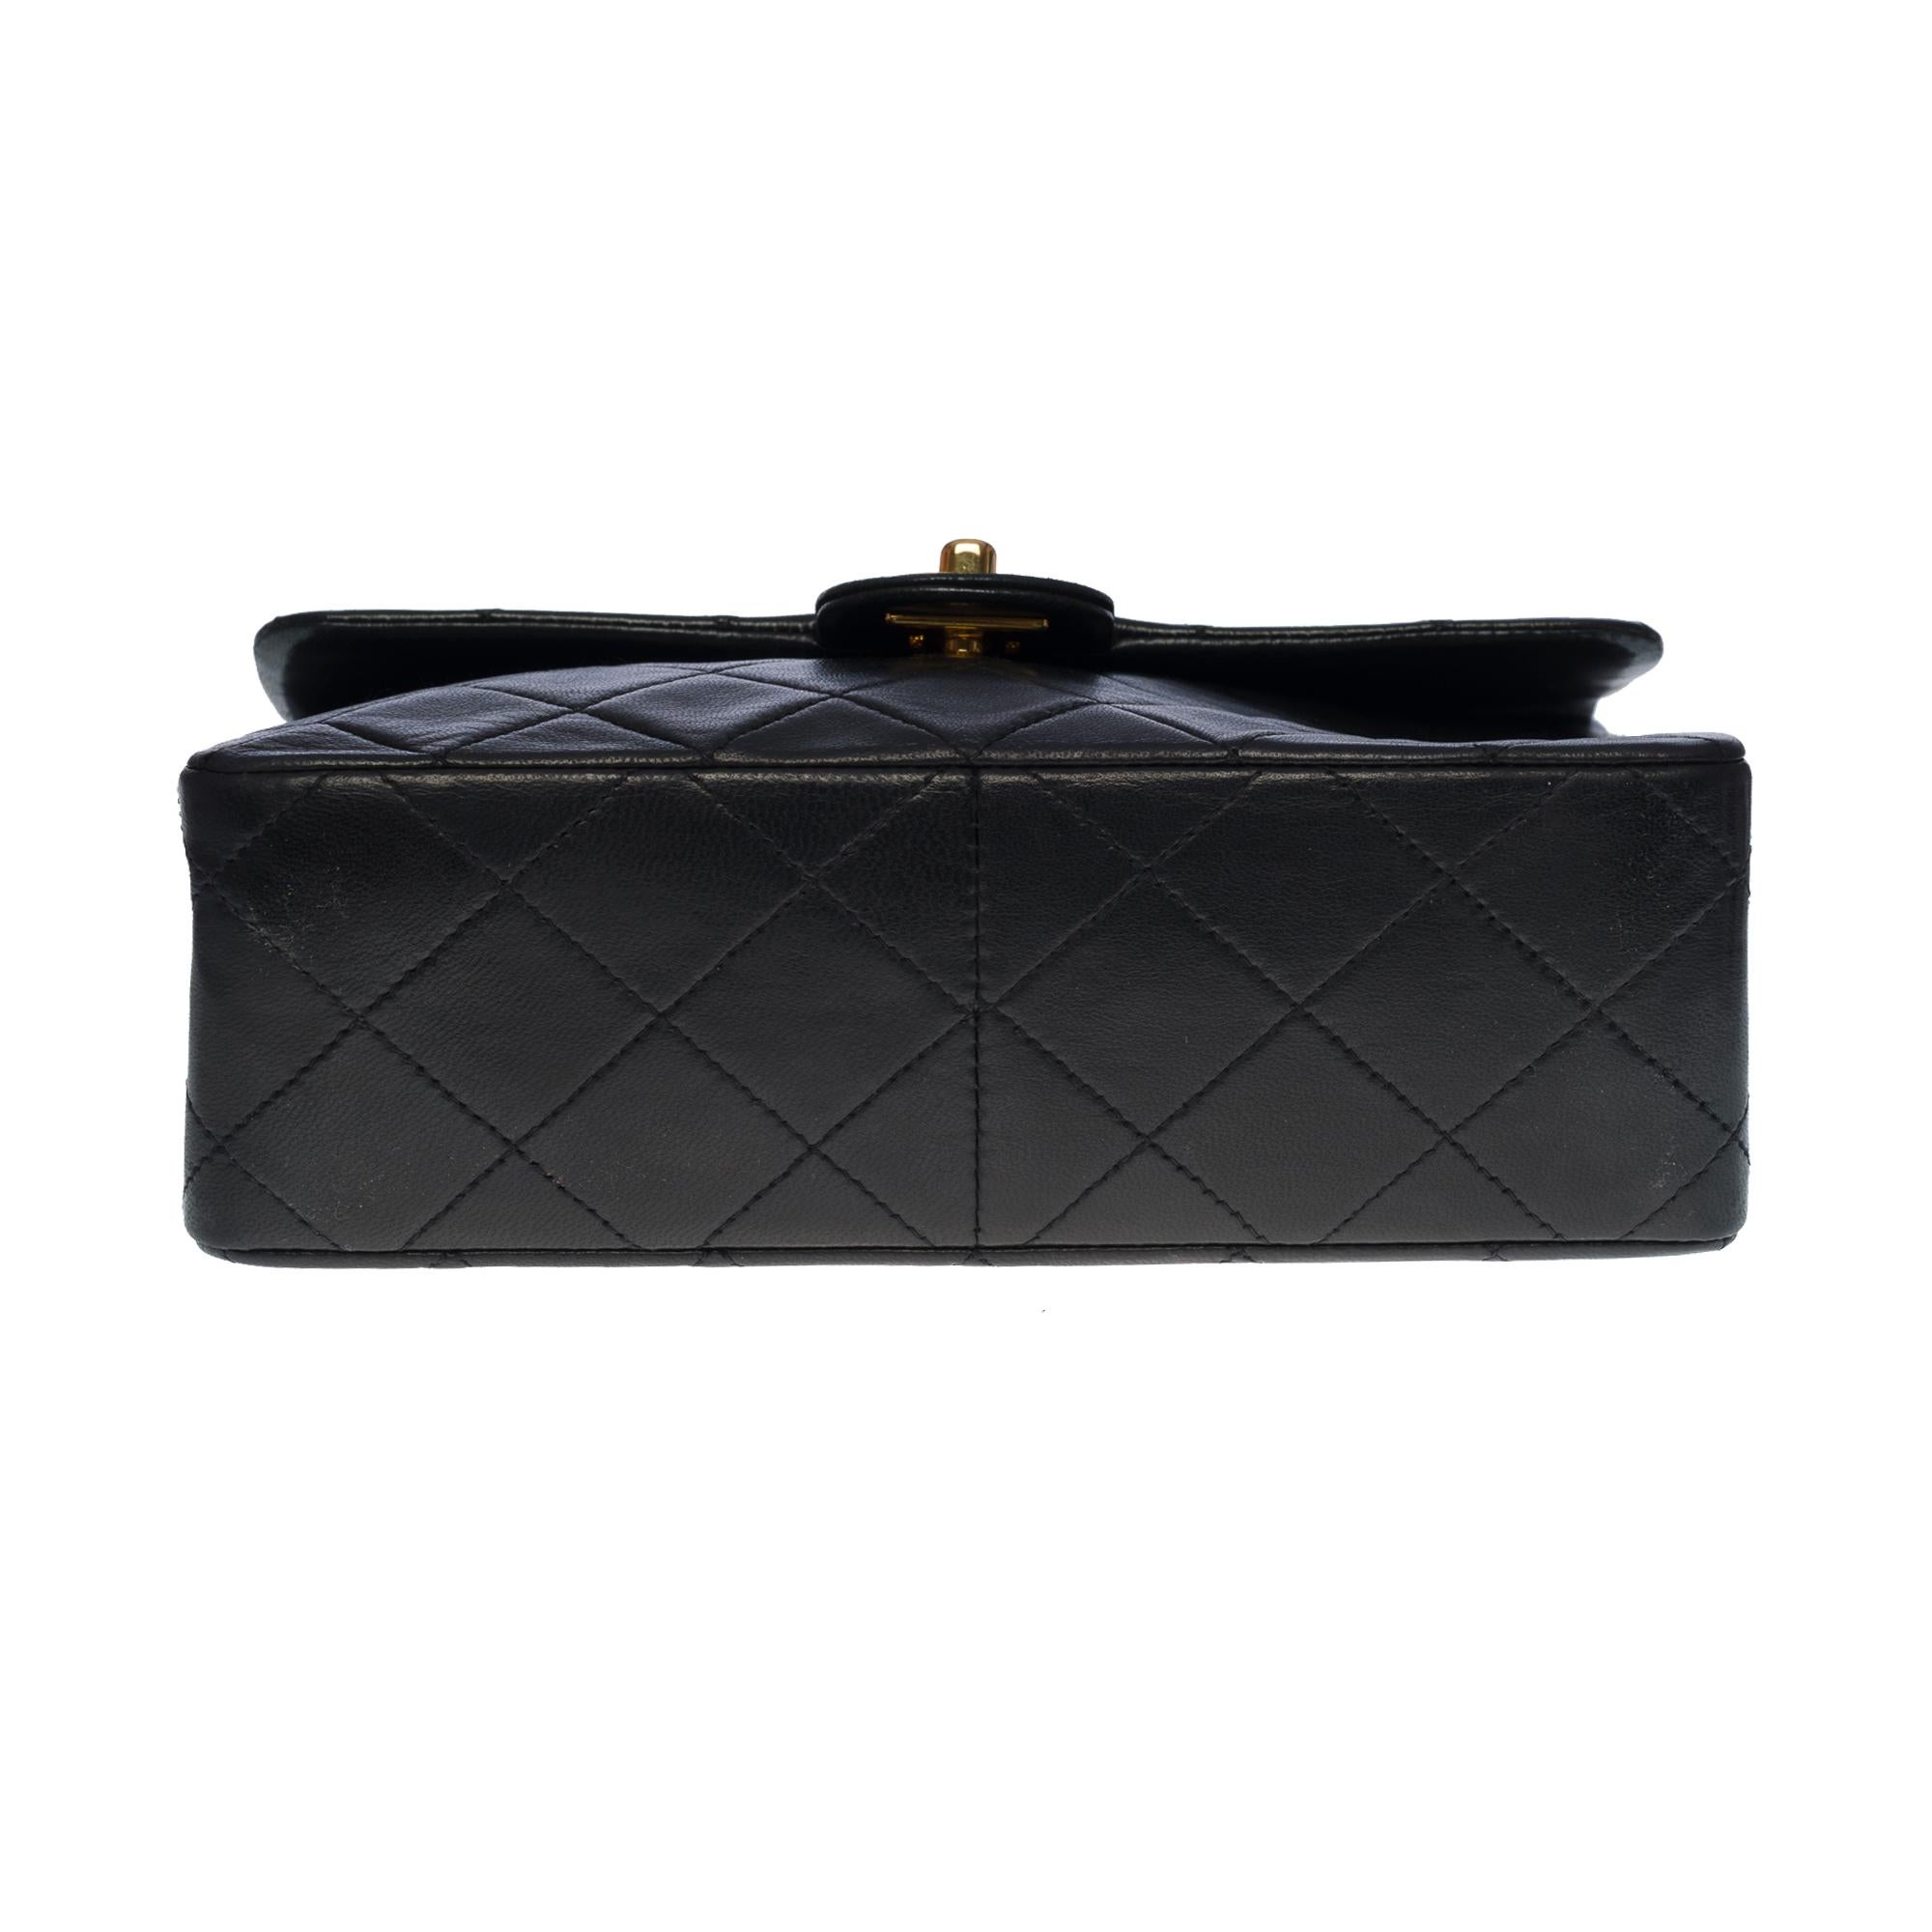 Chanel Timeless Mini Square Flap shoulder bag in black quilted lambskin, GHW 5